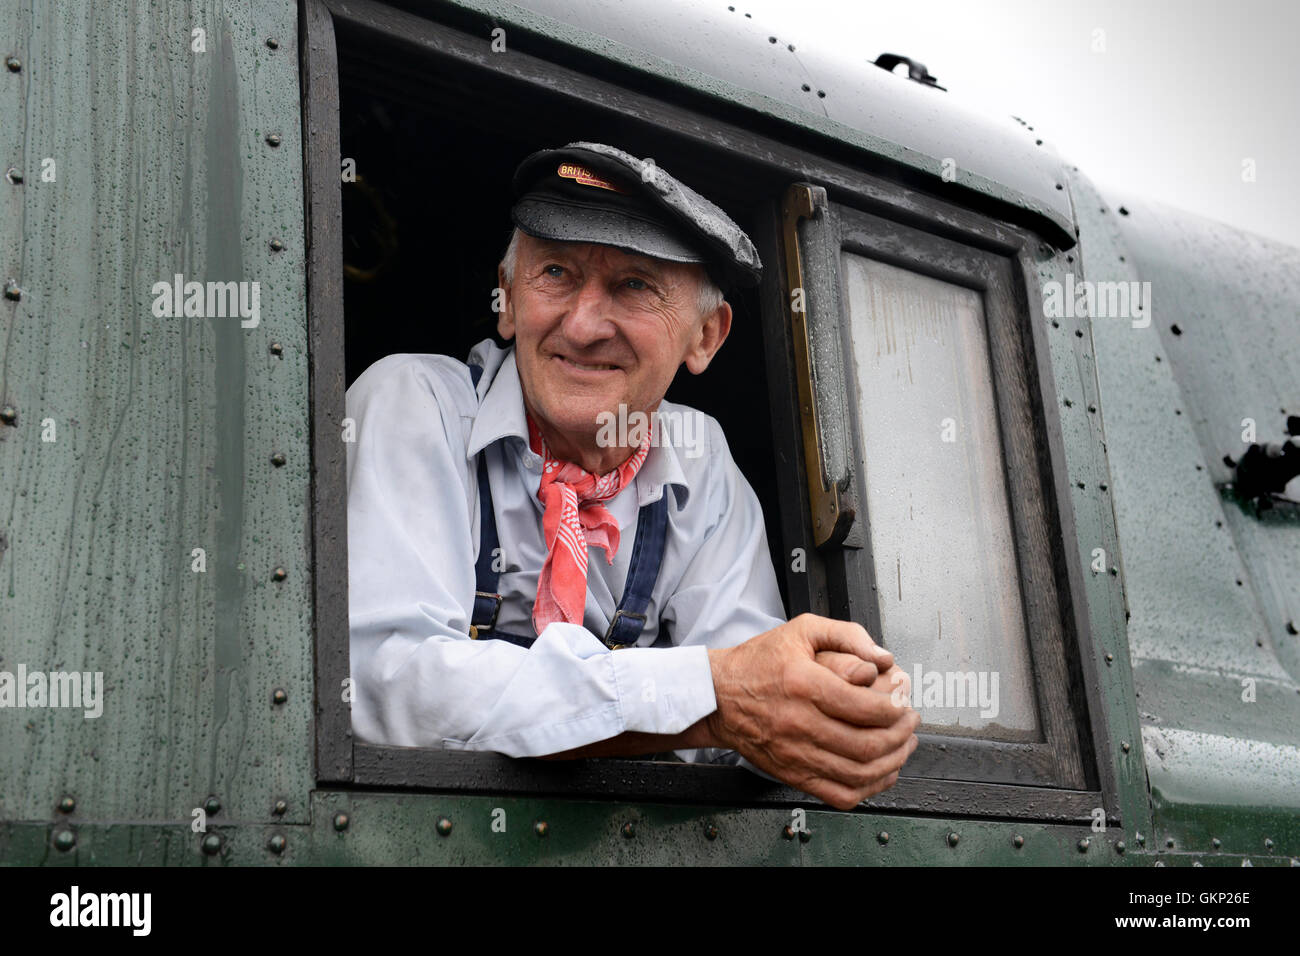 Train driver on steam locomotive for Severn Valley Railway uk Stock Photo